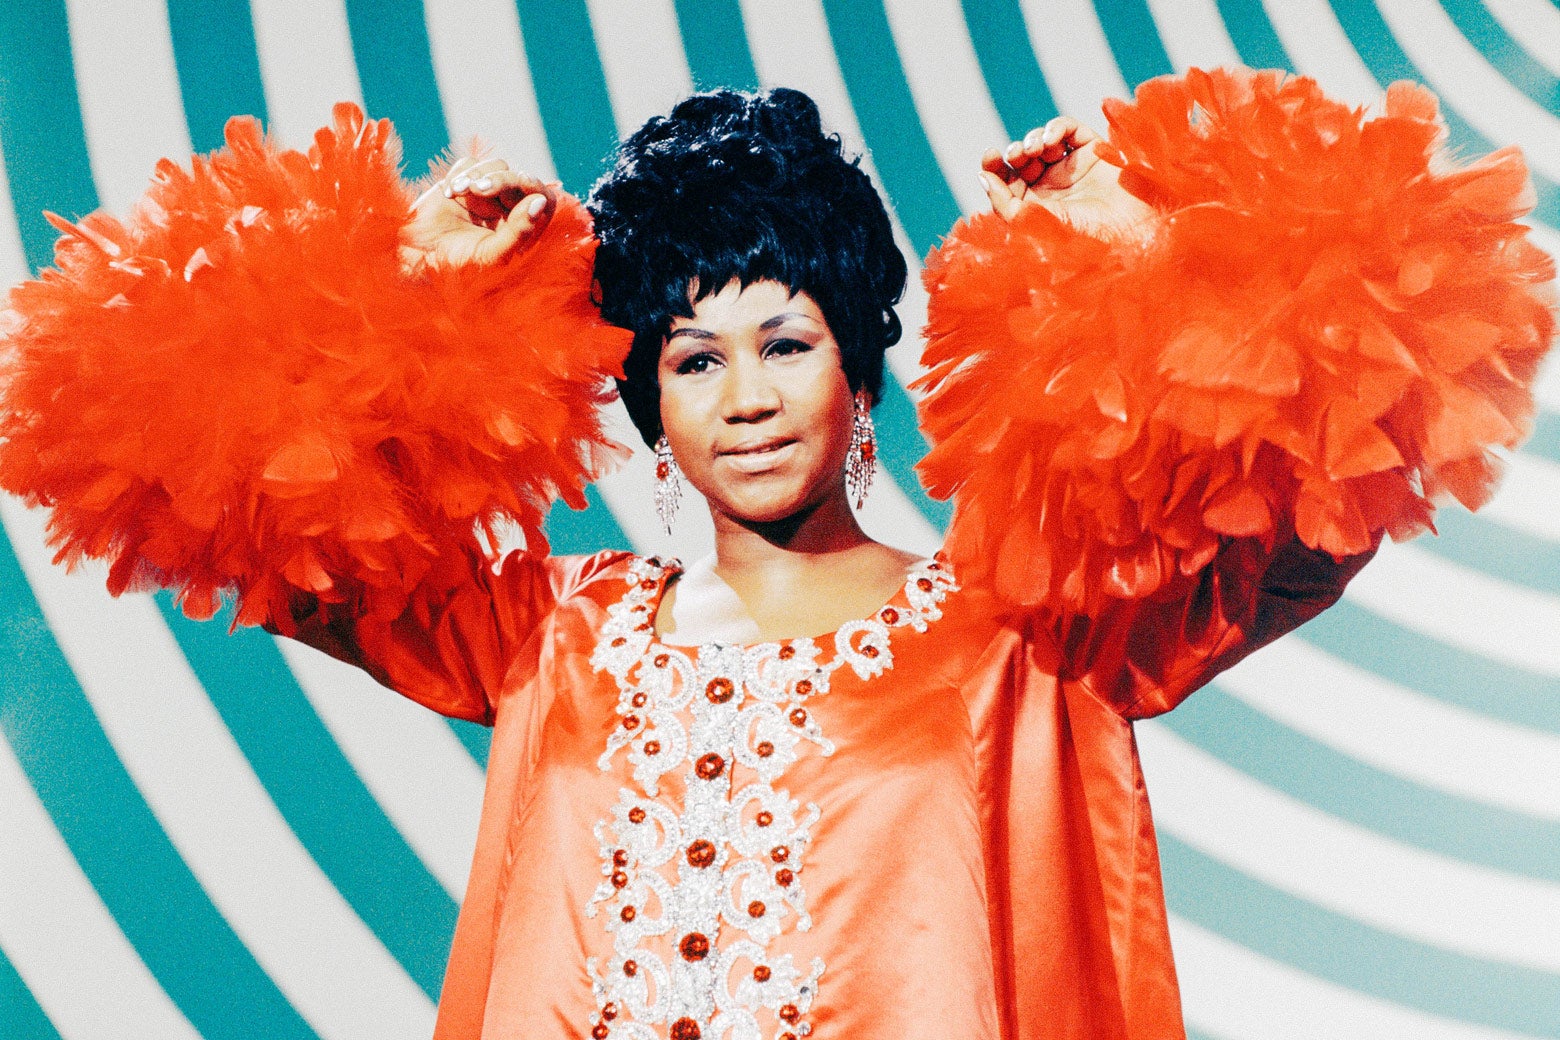 Aretha Franklin on The Andy Williams Show which aired May 4, 1969.